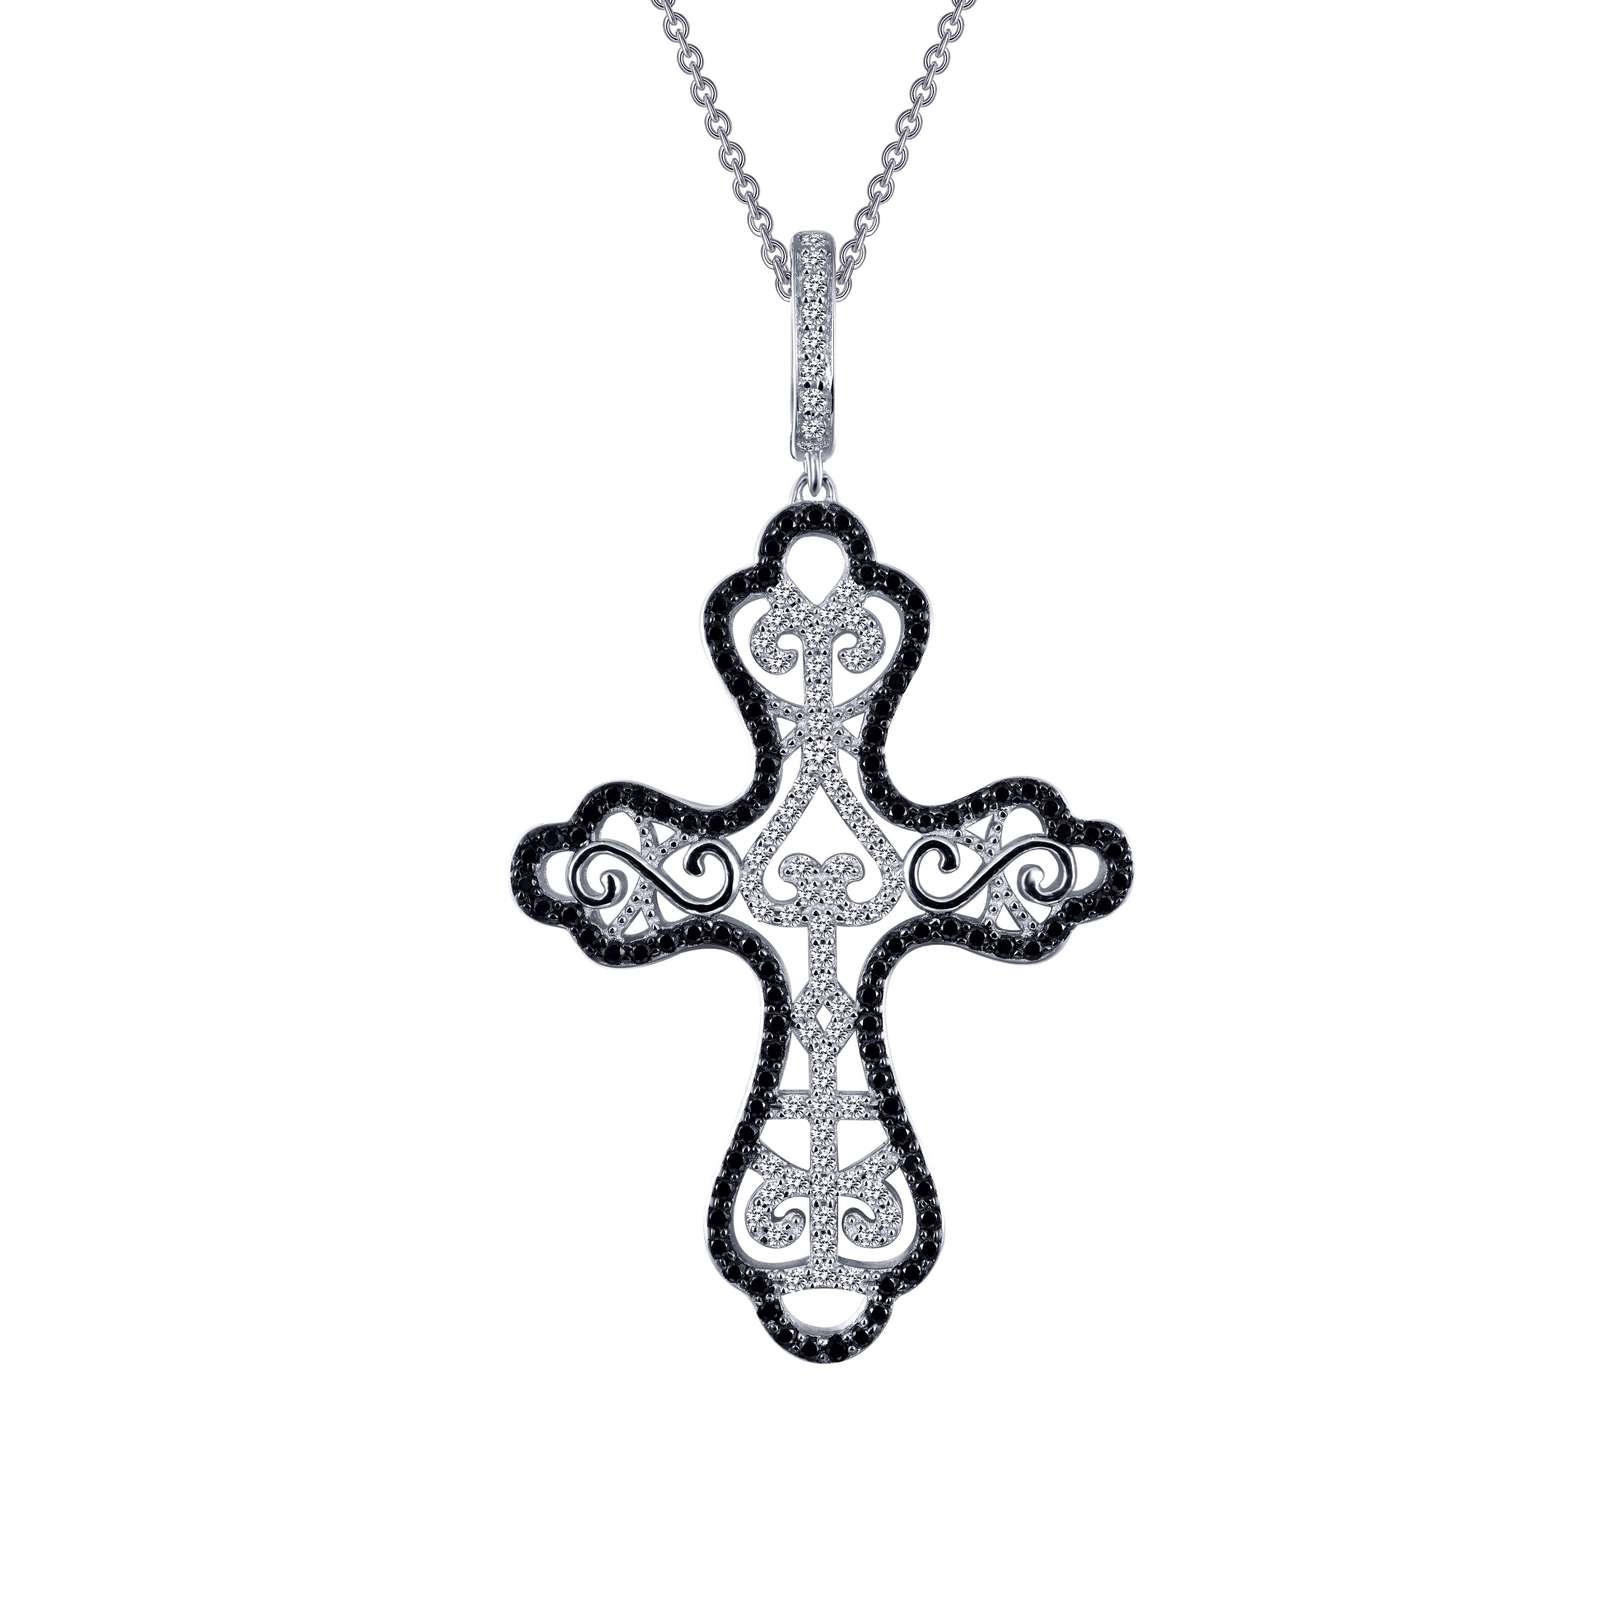 Scroll Cross Pendant Necklace Griner Jewelry Co. Moultrie, GA